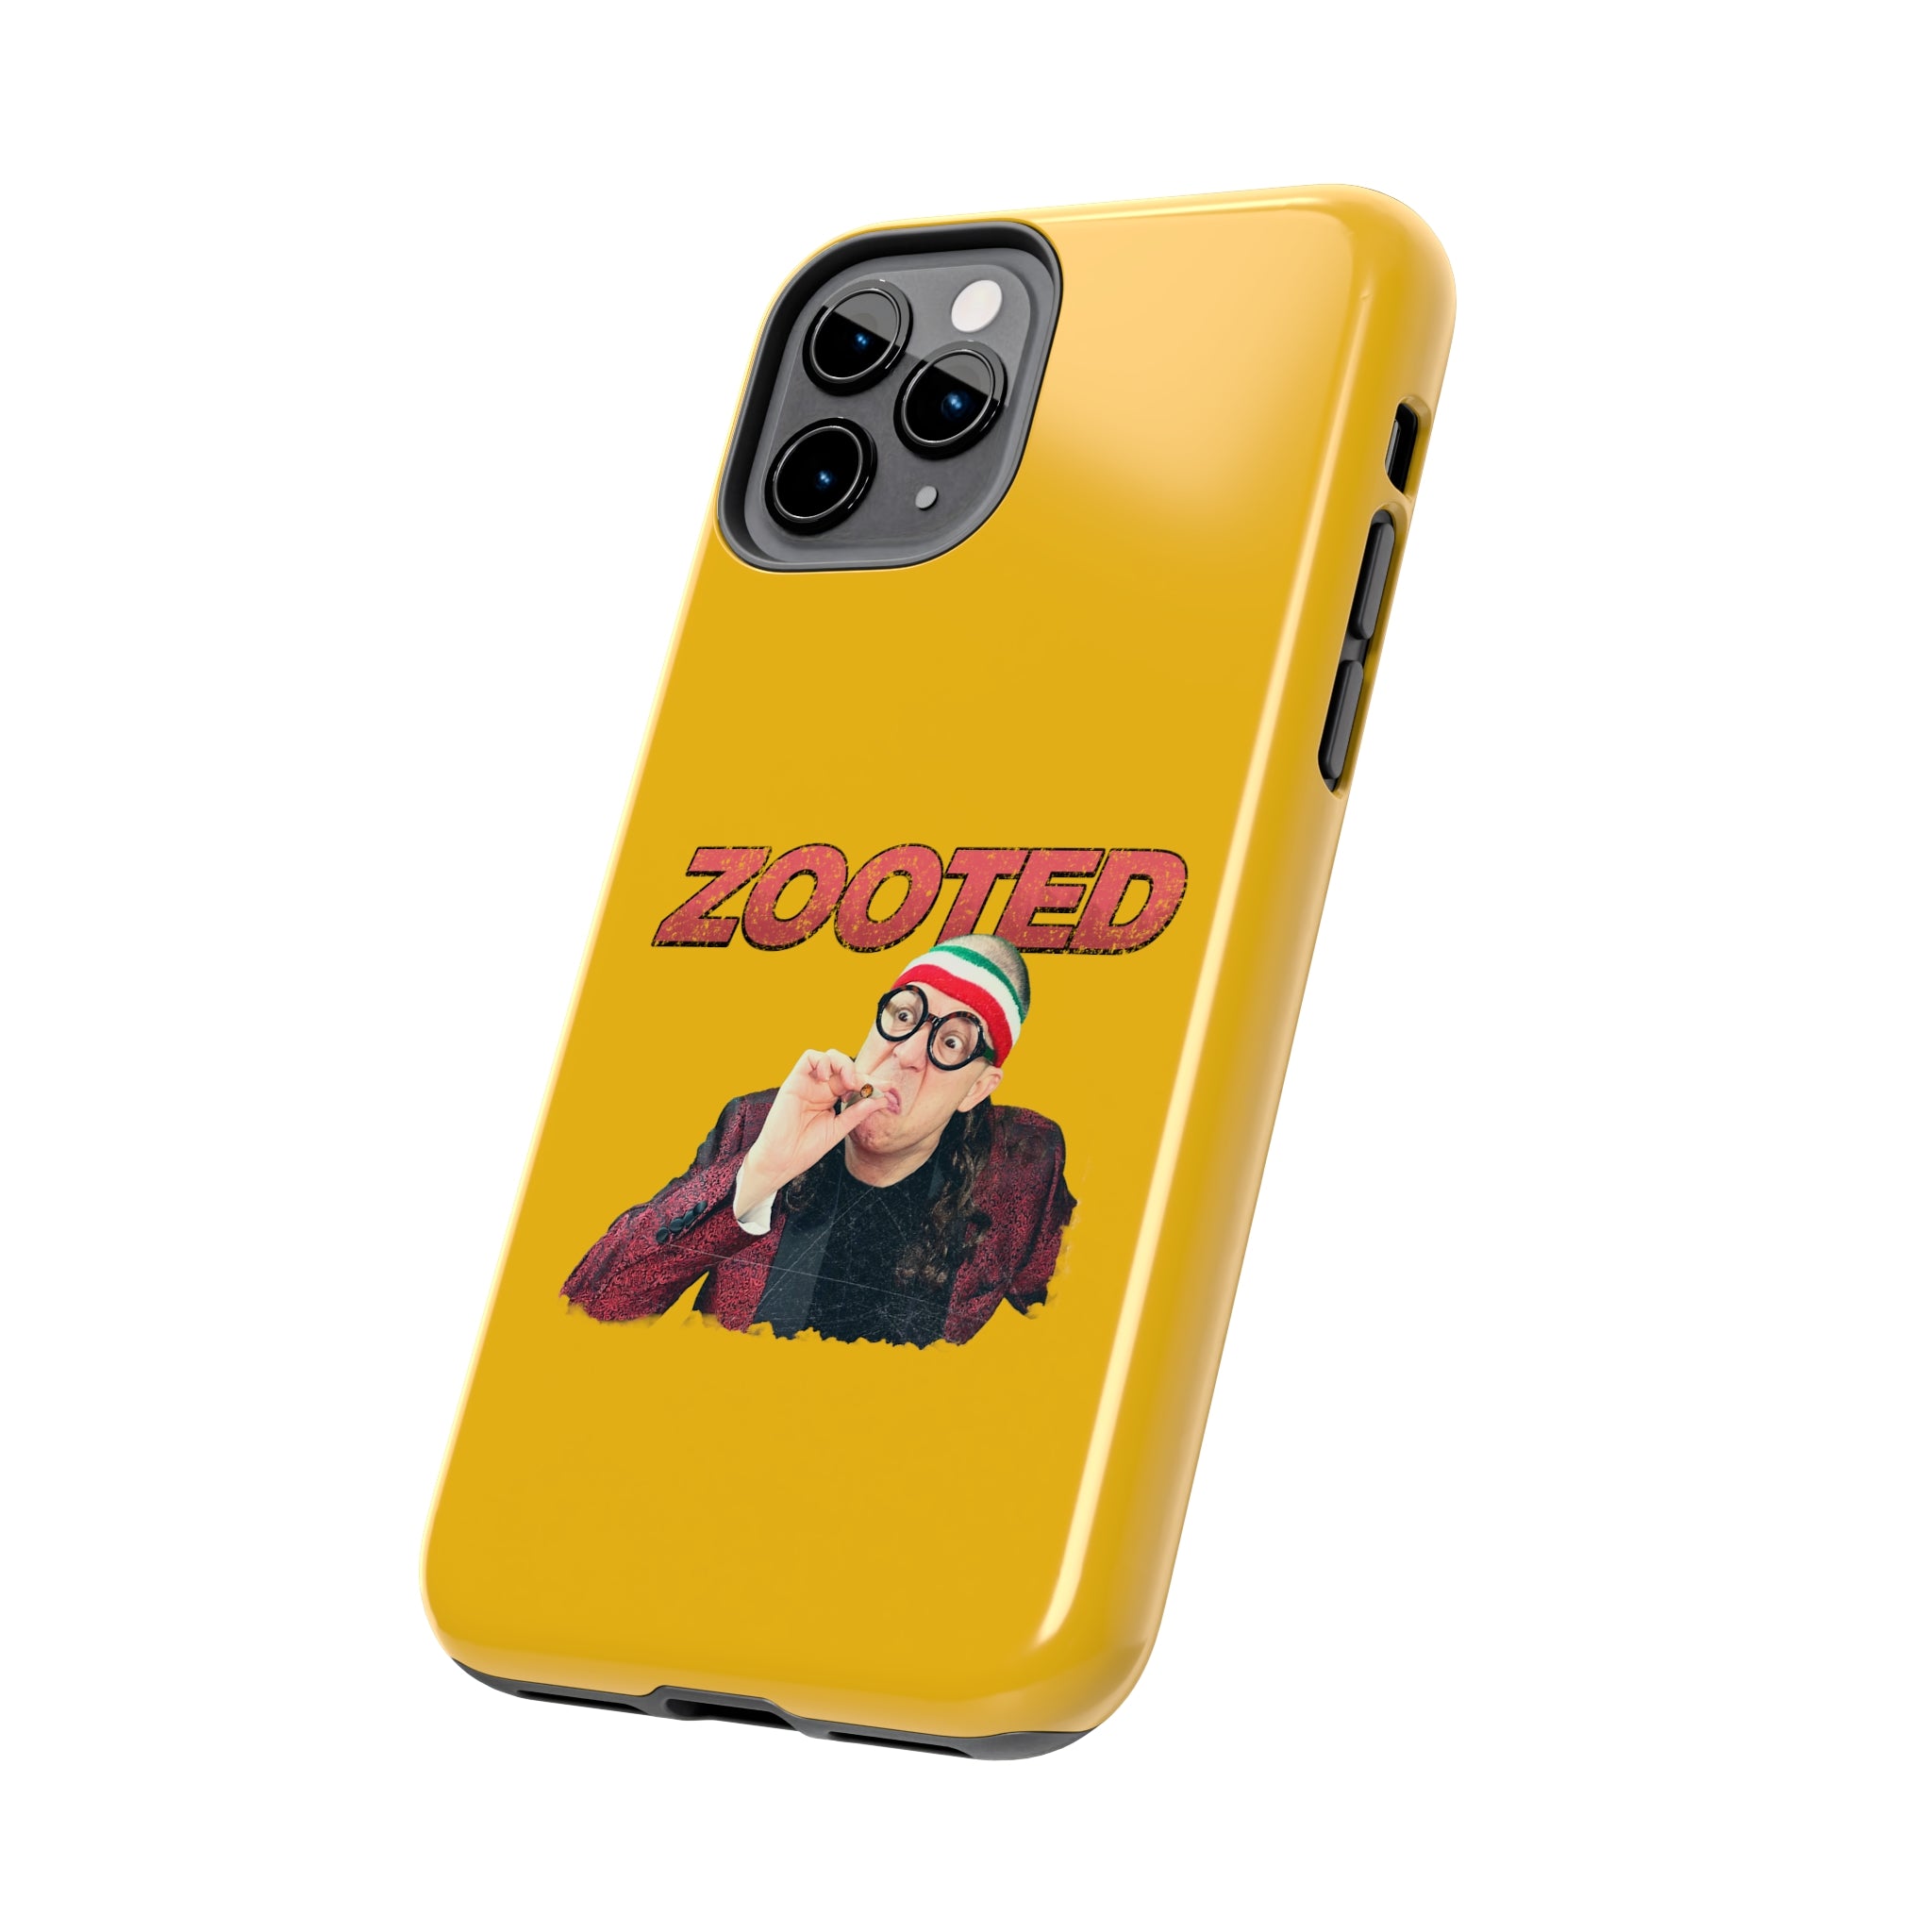 ZOOTED YELLOW Tough Phone Cases